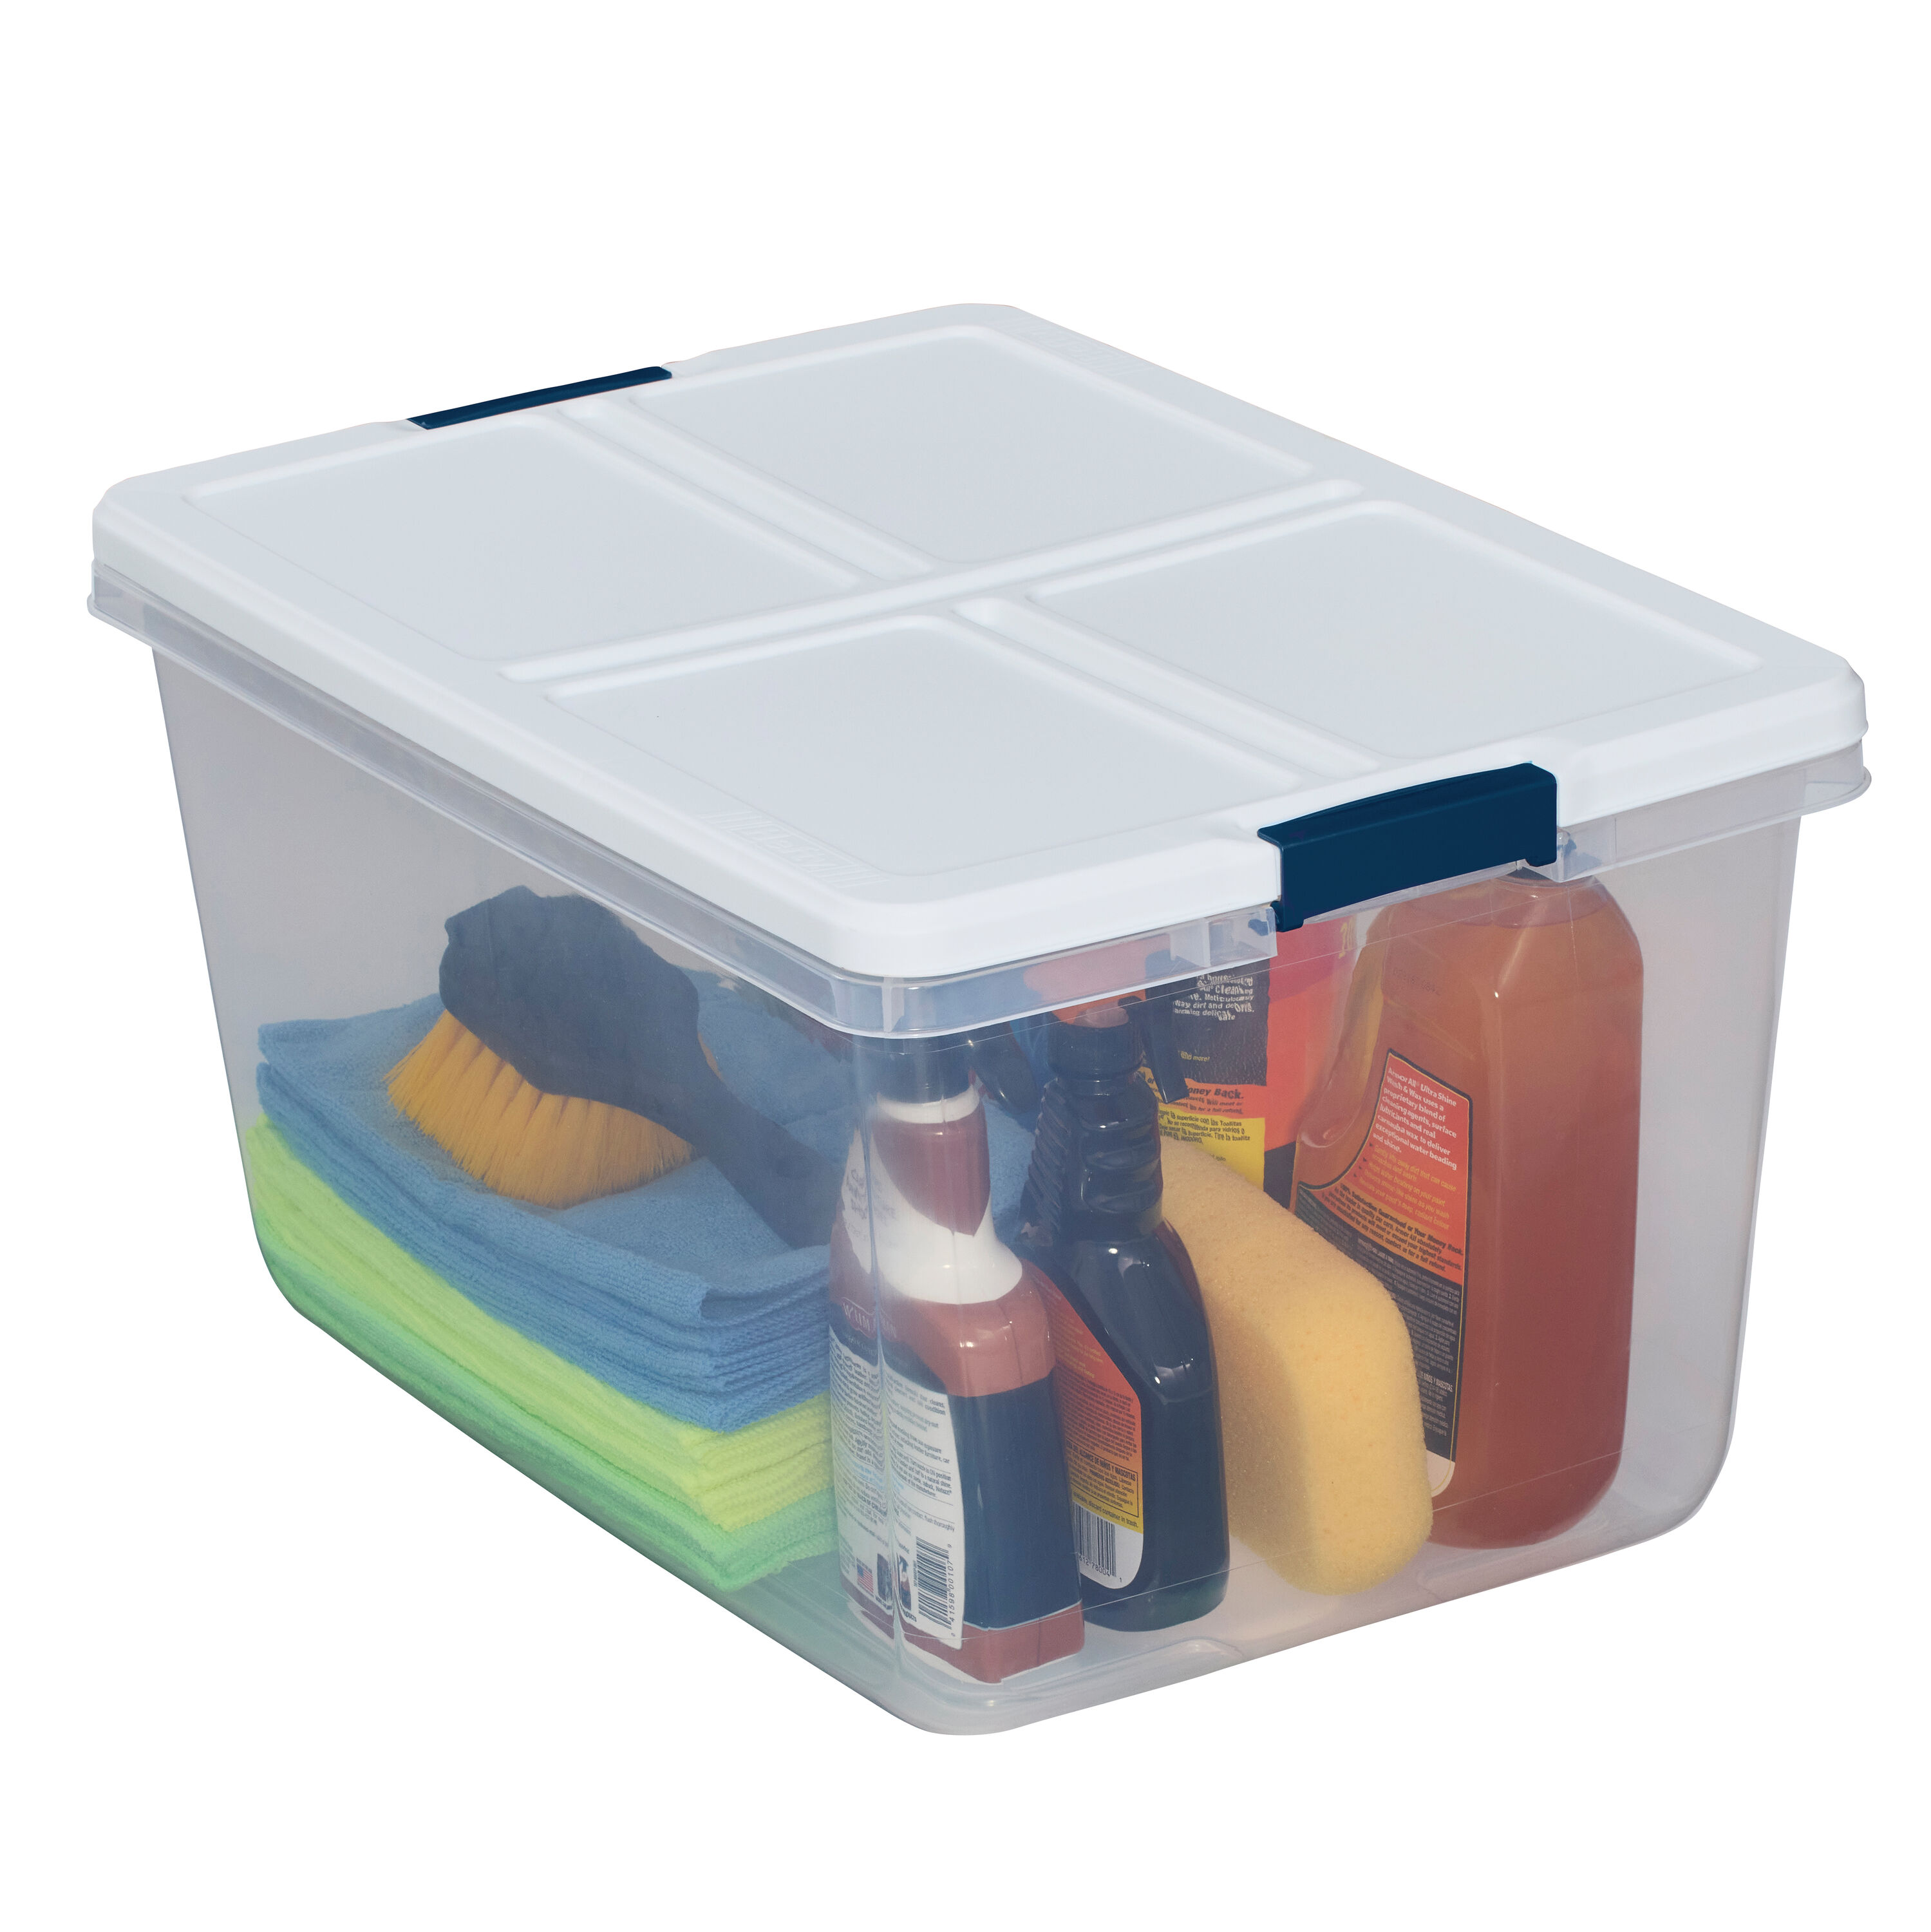  Heavy Duty Plastic Containers with Lids 12 EA Mix of